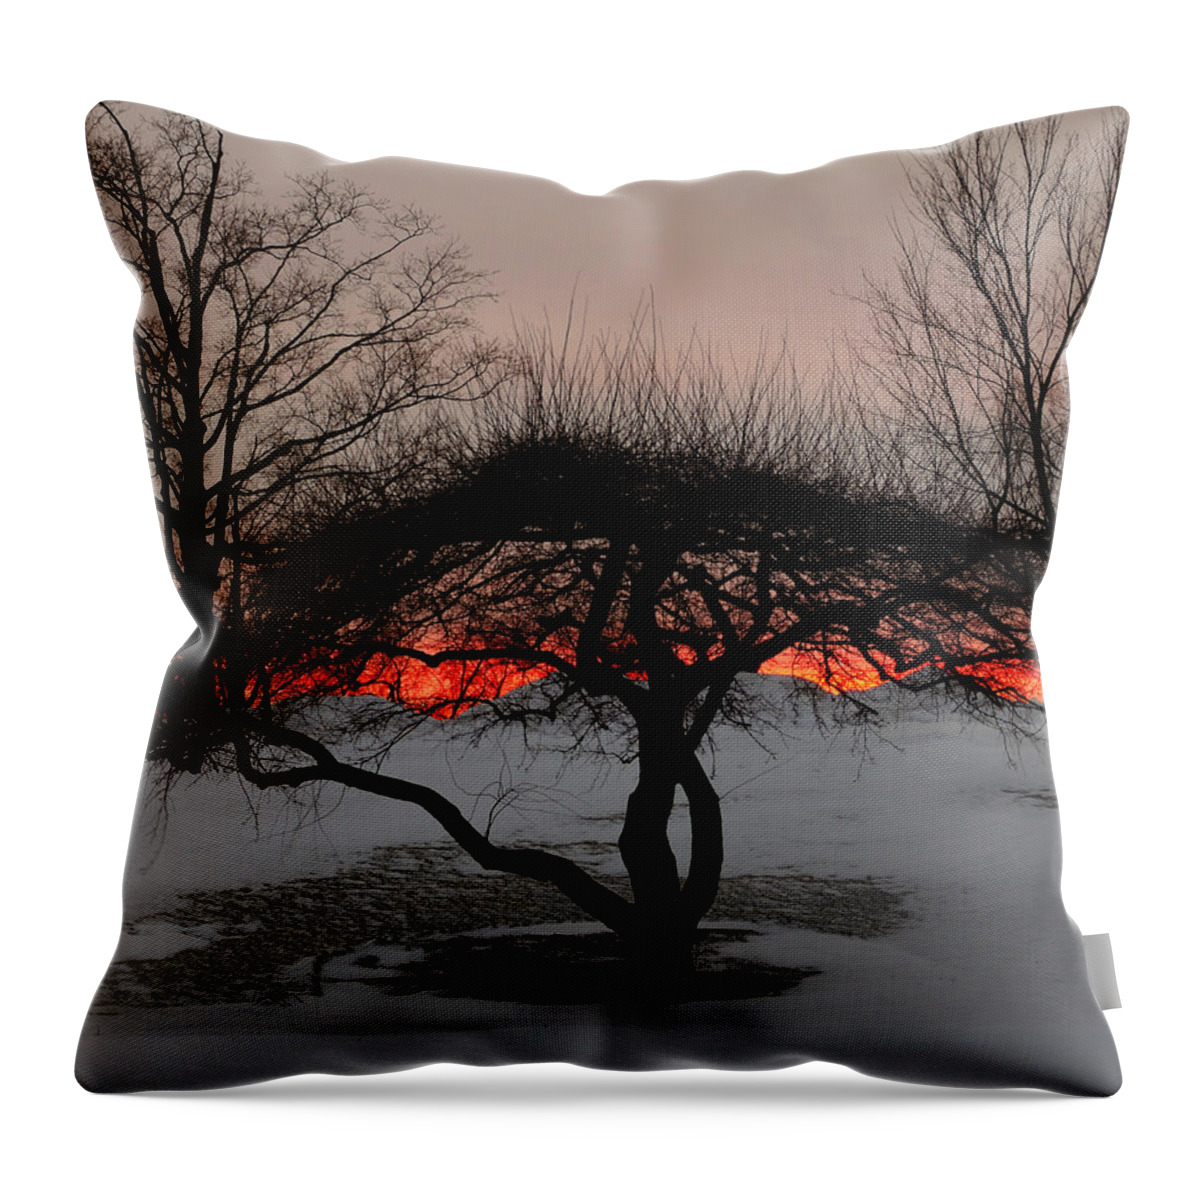 Tree Throw Pillow featuring the photograph Sunroof by Luke Moore